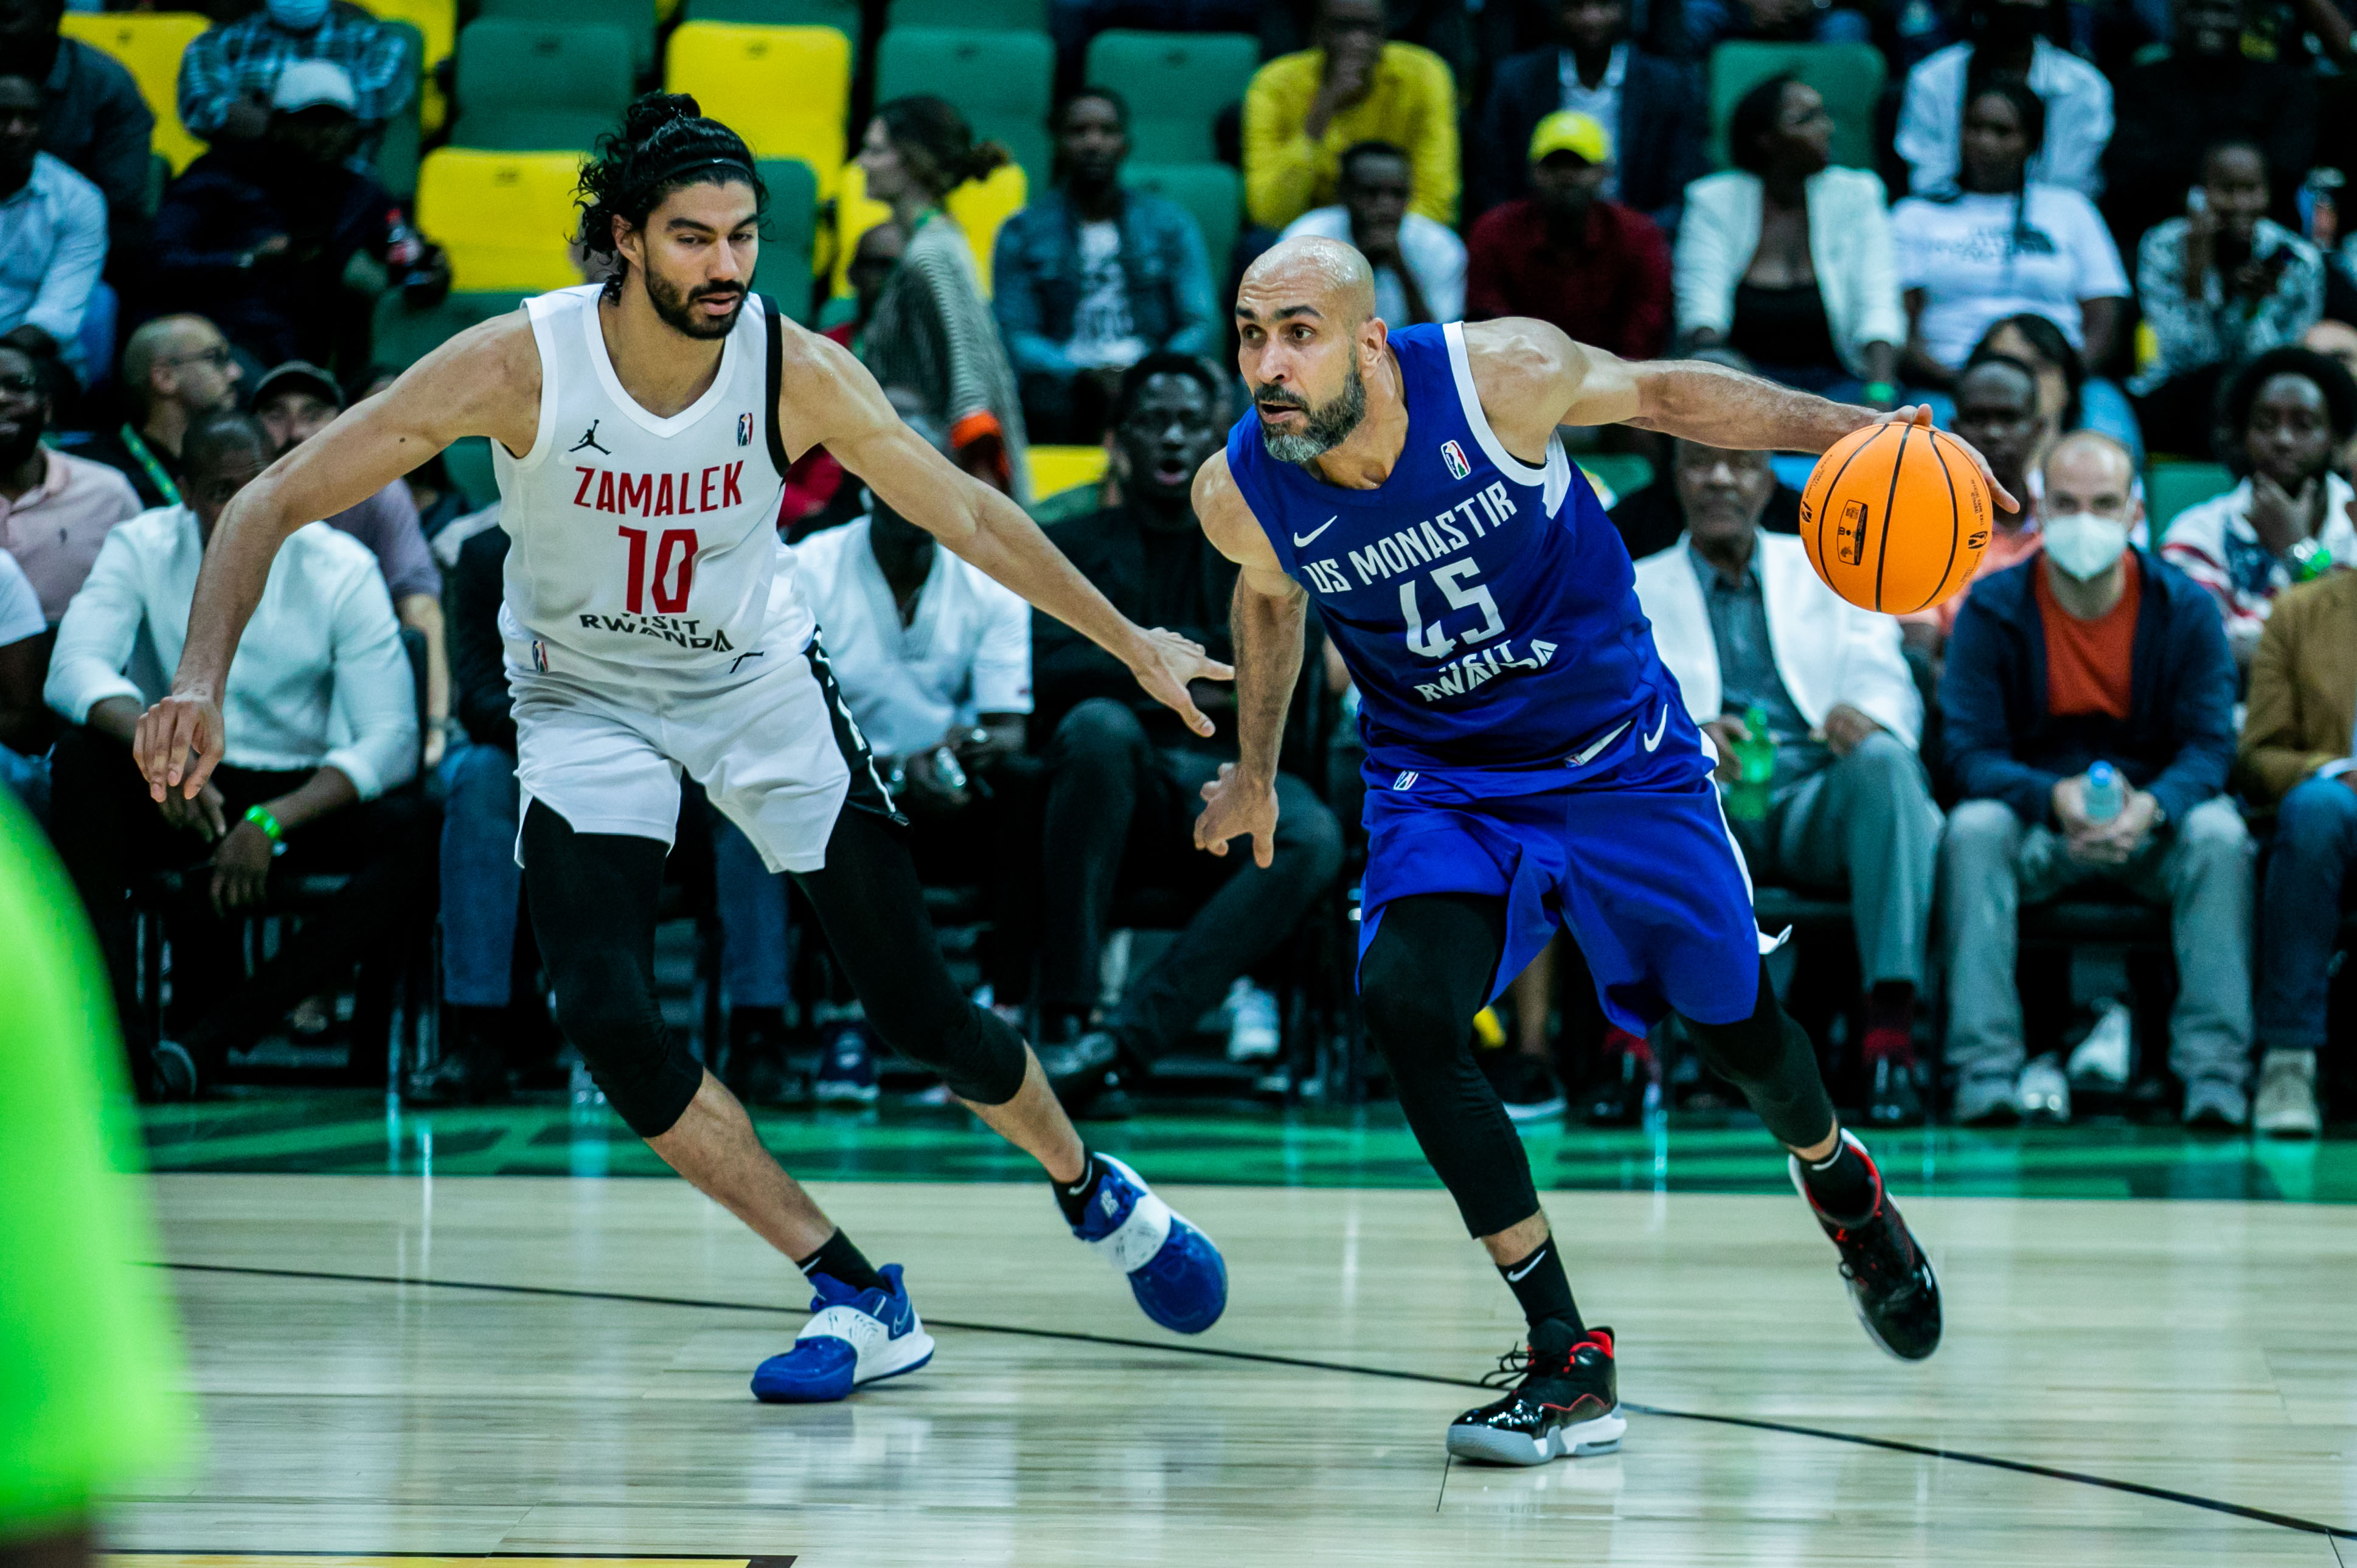 Radhouane Slimane scored a team-high 21 points to inspire US Monastir to a 88-81 win over defending champions Zamalek. He was also named the MVP of the game. 